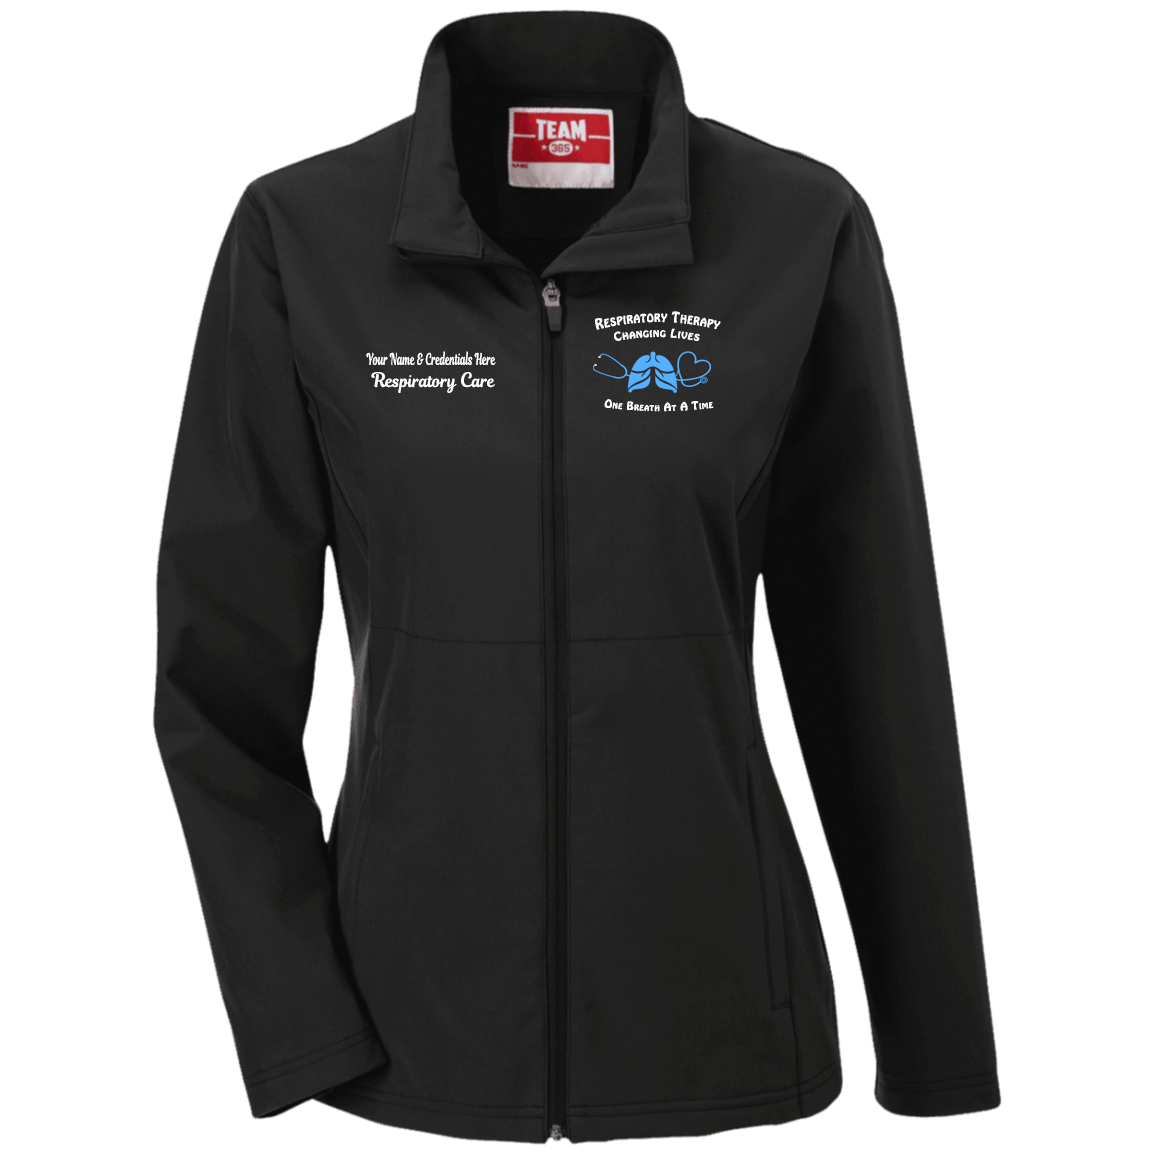 Respiratory Therapist | Women's Personalized Team 365 Softshell Jacket-TD Gift Solutions.com